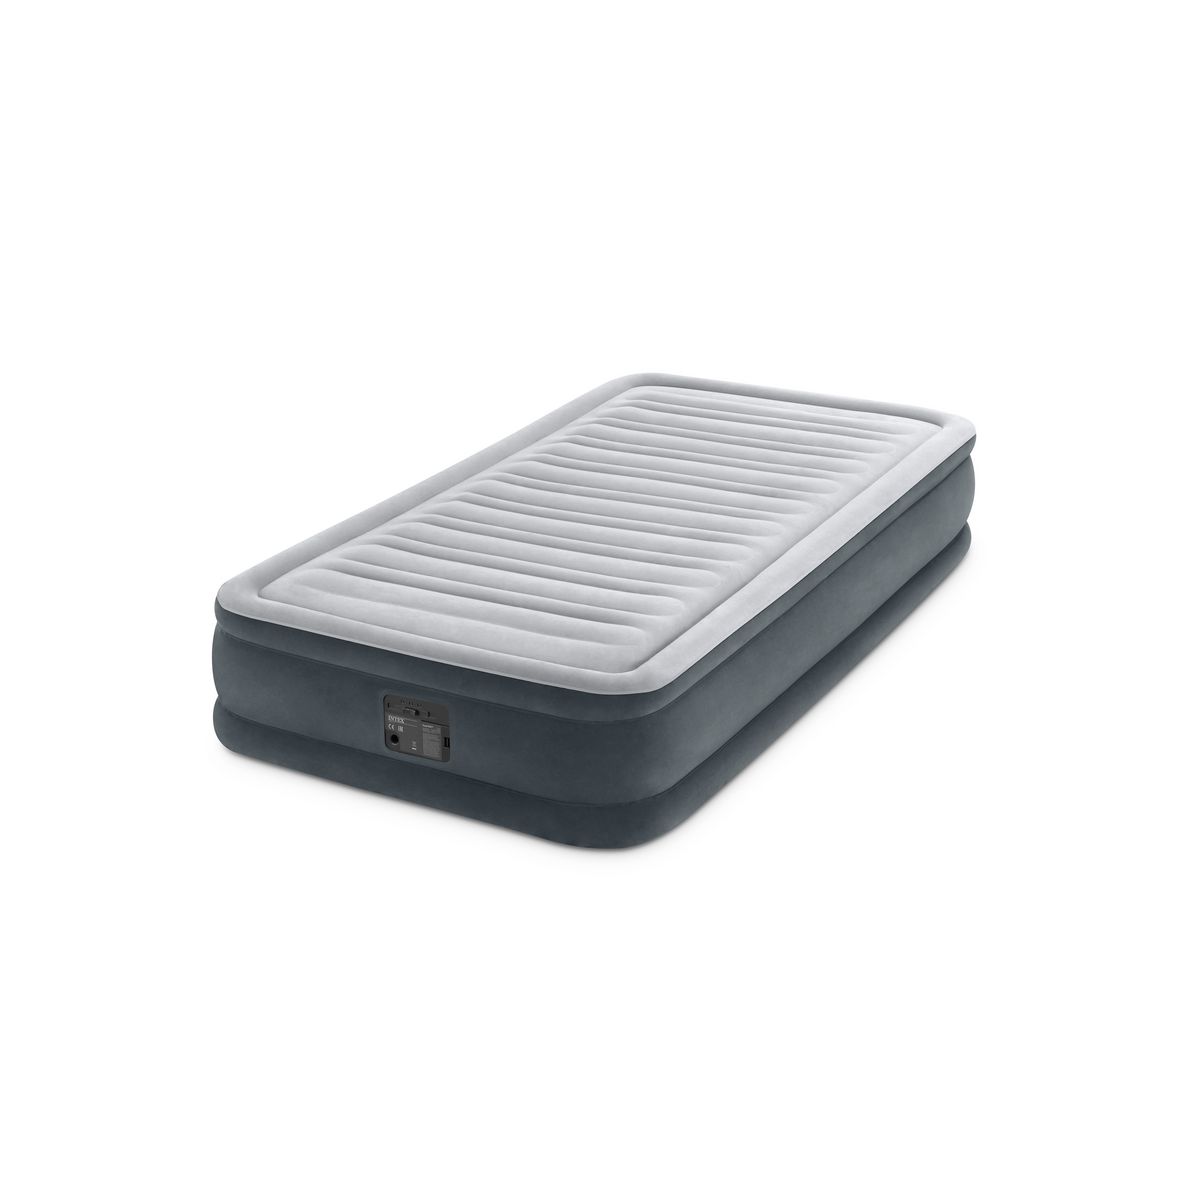 Matelas Gonflable Frites Intex • Out at Home